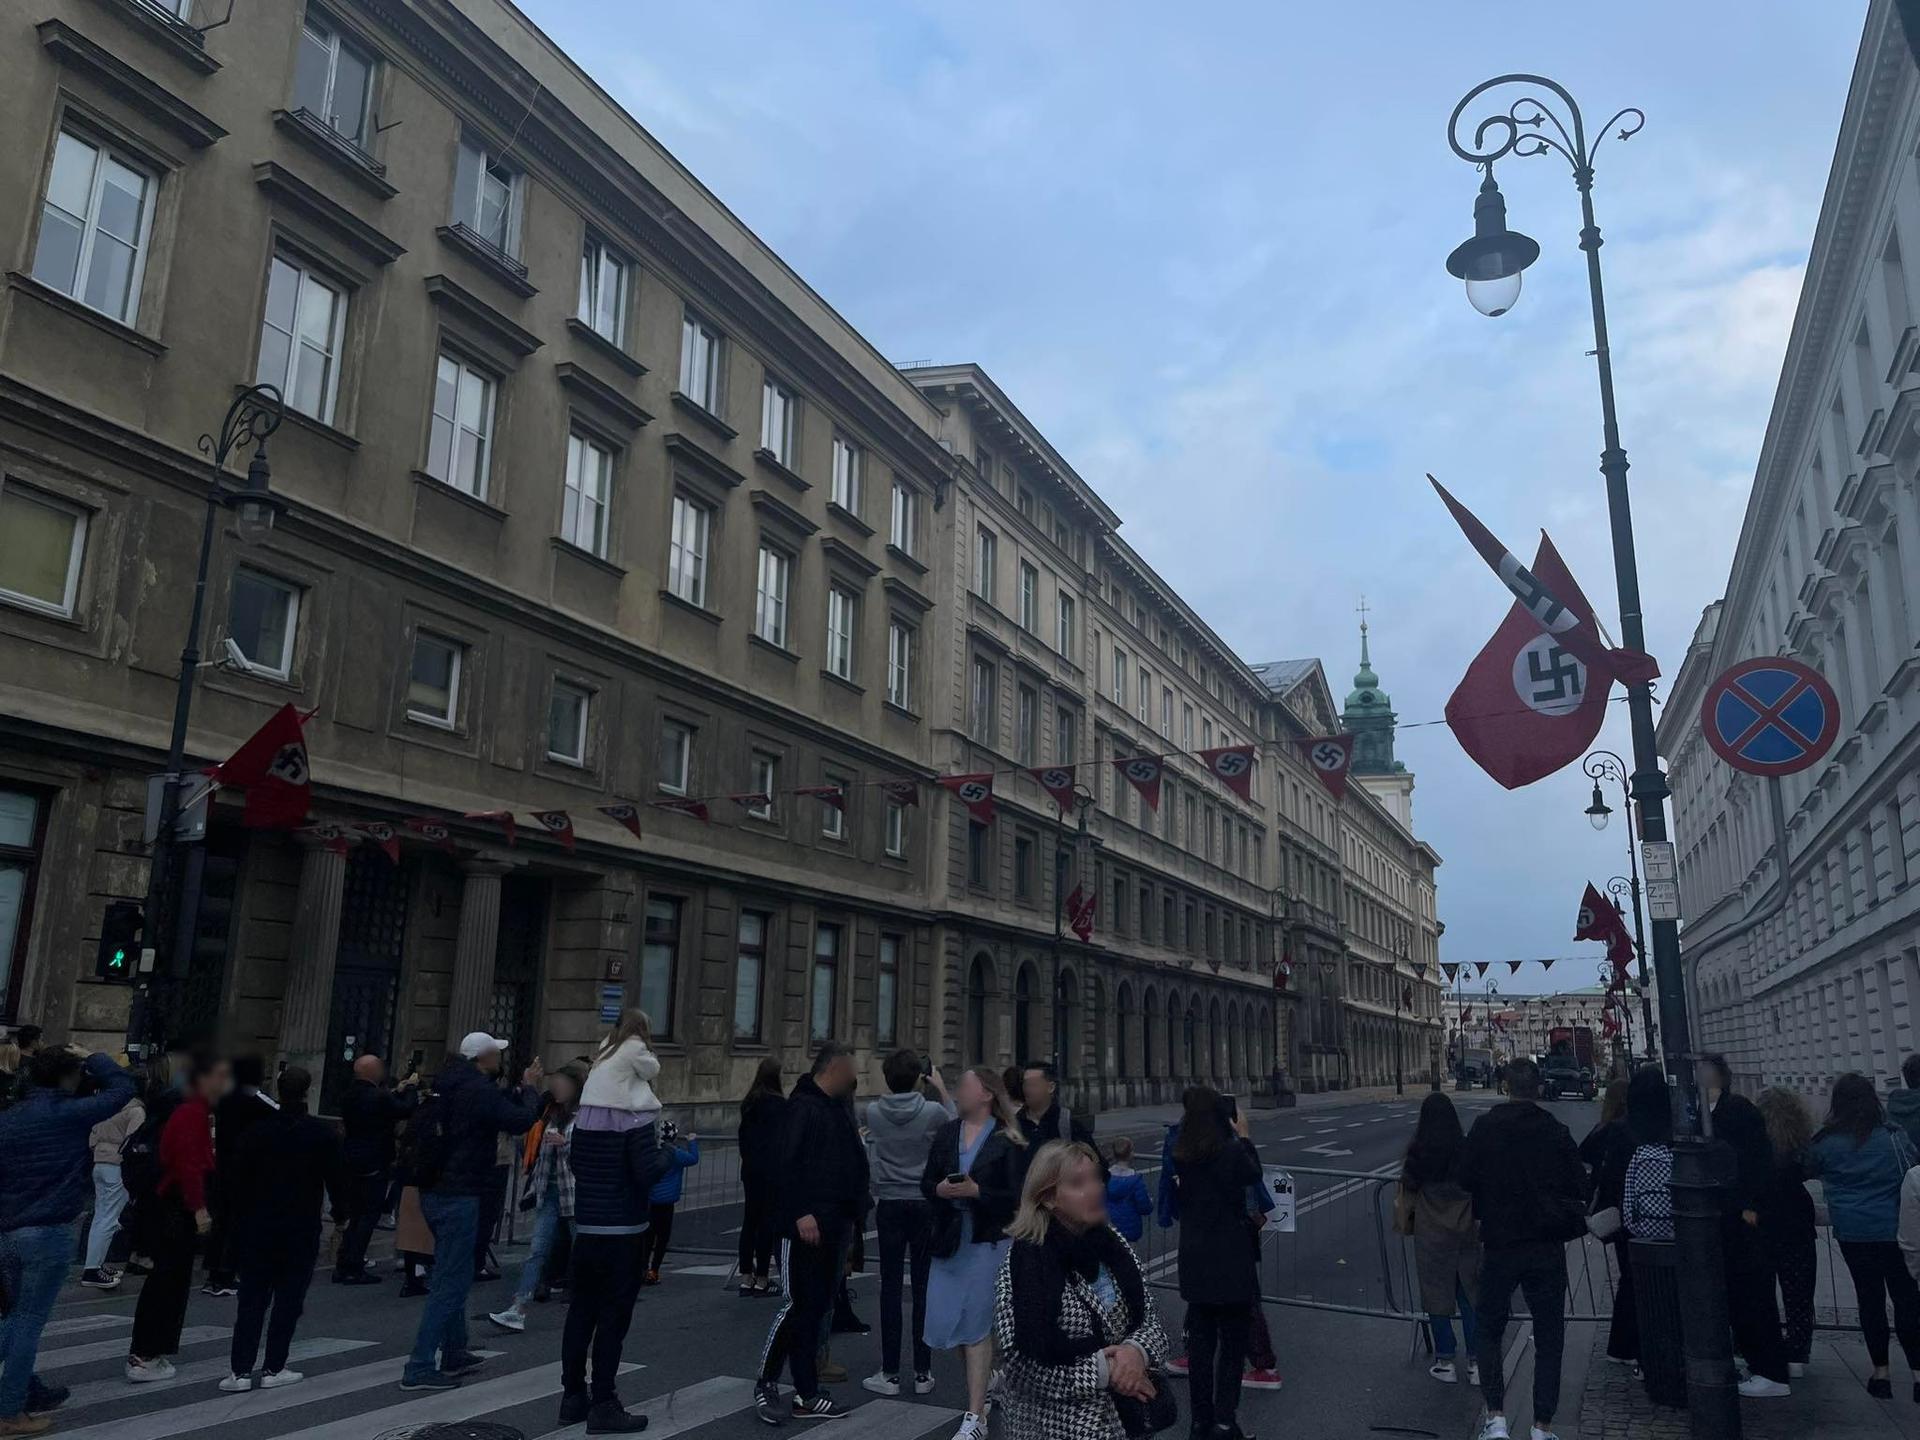 Nazi flags on Nowy Świat in Warsaw.  They are making a movie.  We know what!